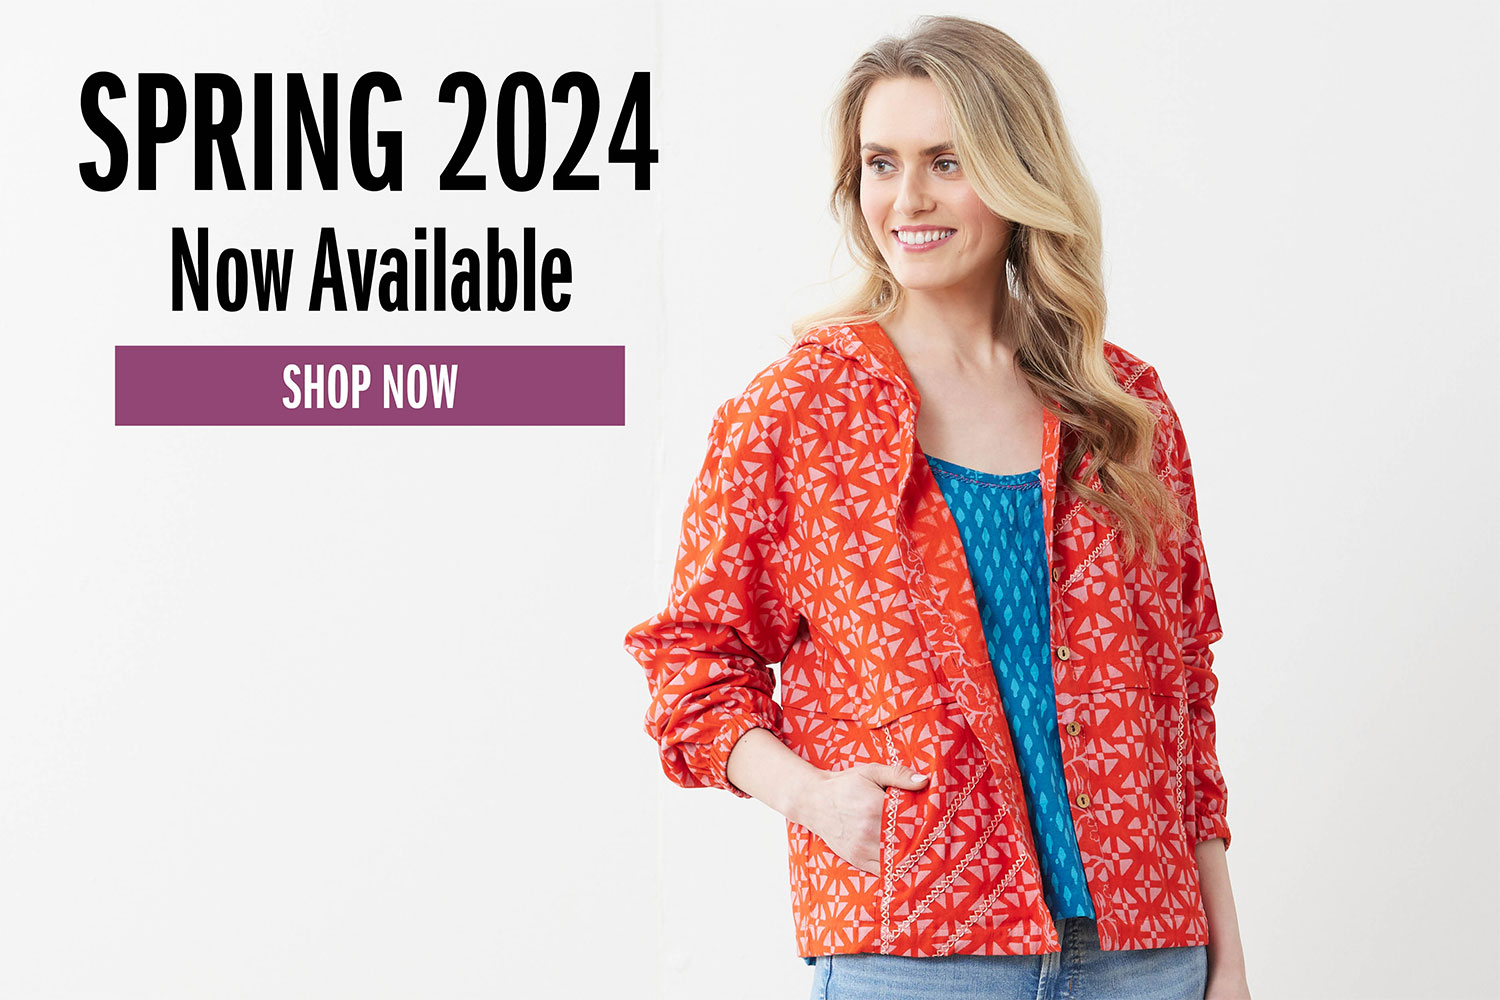 SPRING 2024 Now Available SHOP NOW